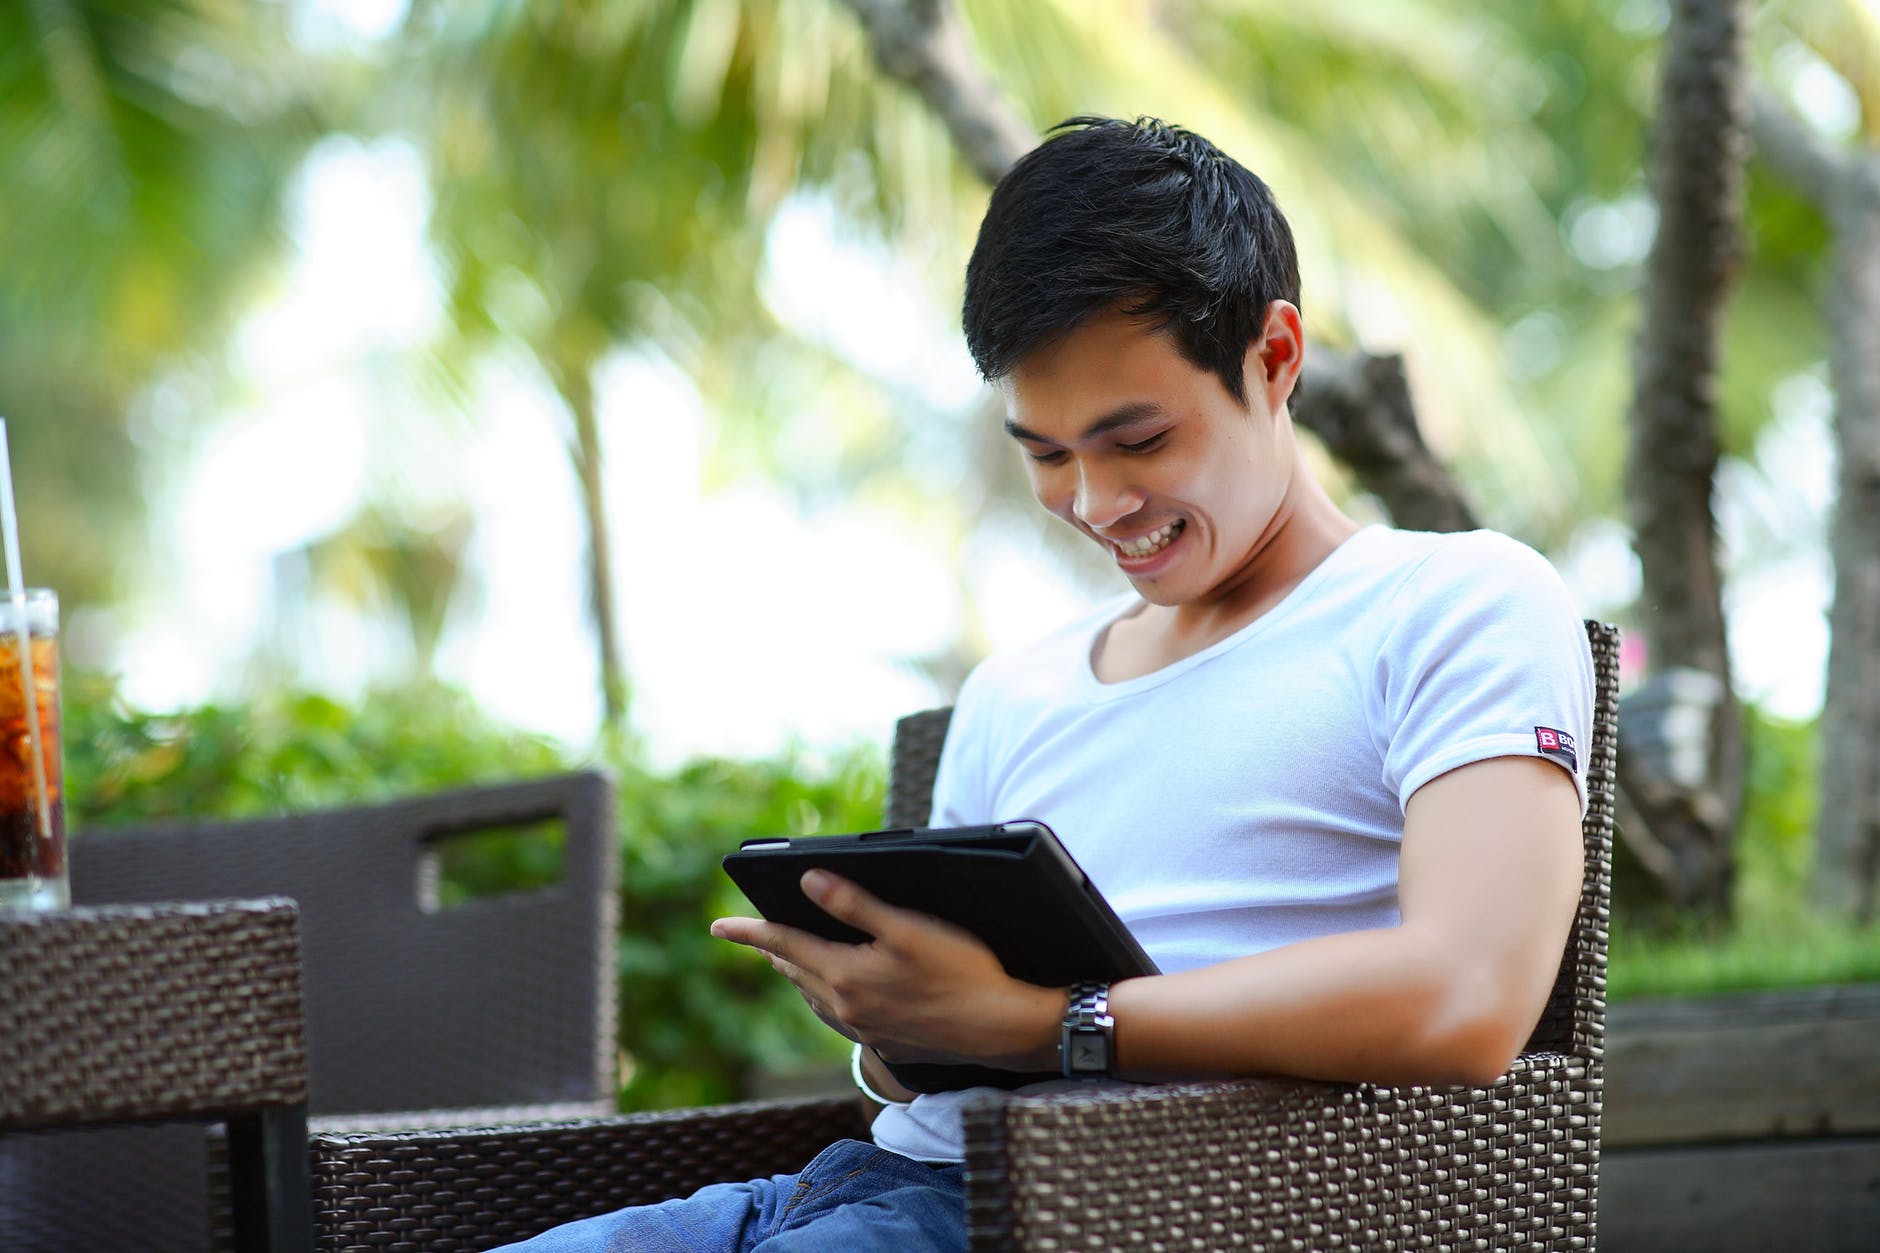 Smiling man sitting outside and looking at tablet PC